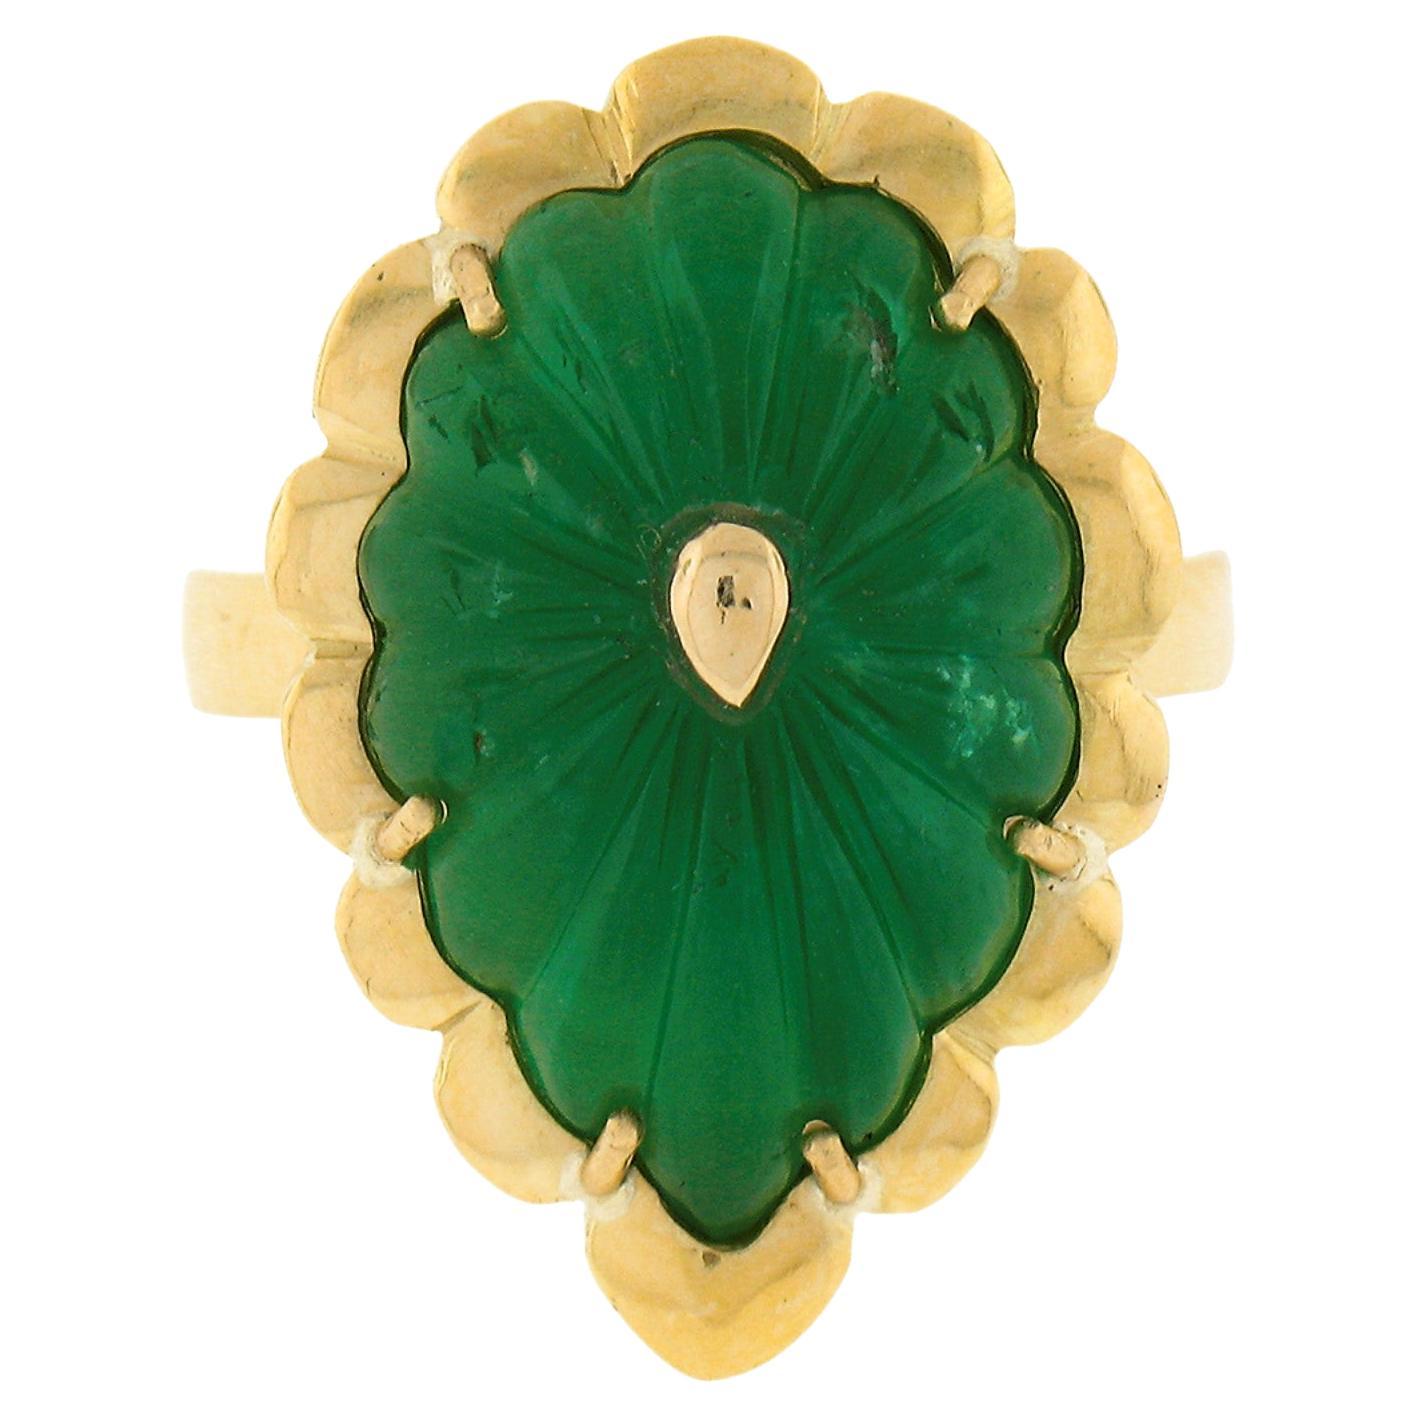 New Handmade 18K Green Gold 9ct GIA Carved Green Emerald Statement Cocktail Ring